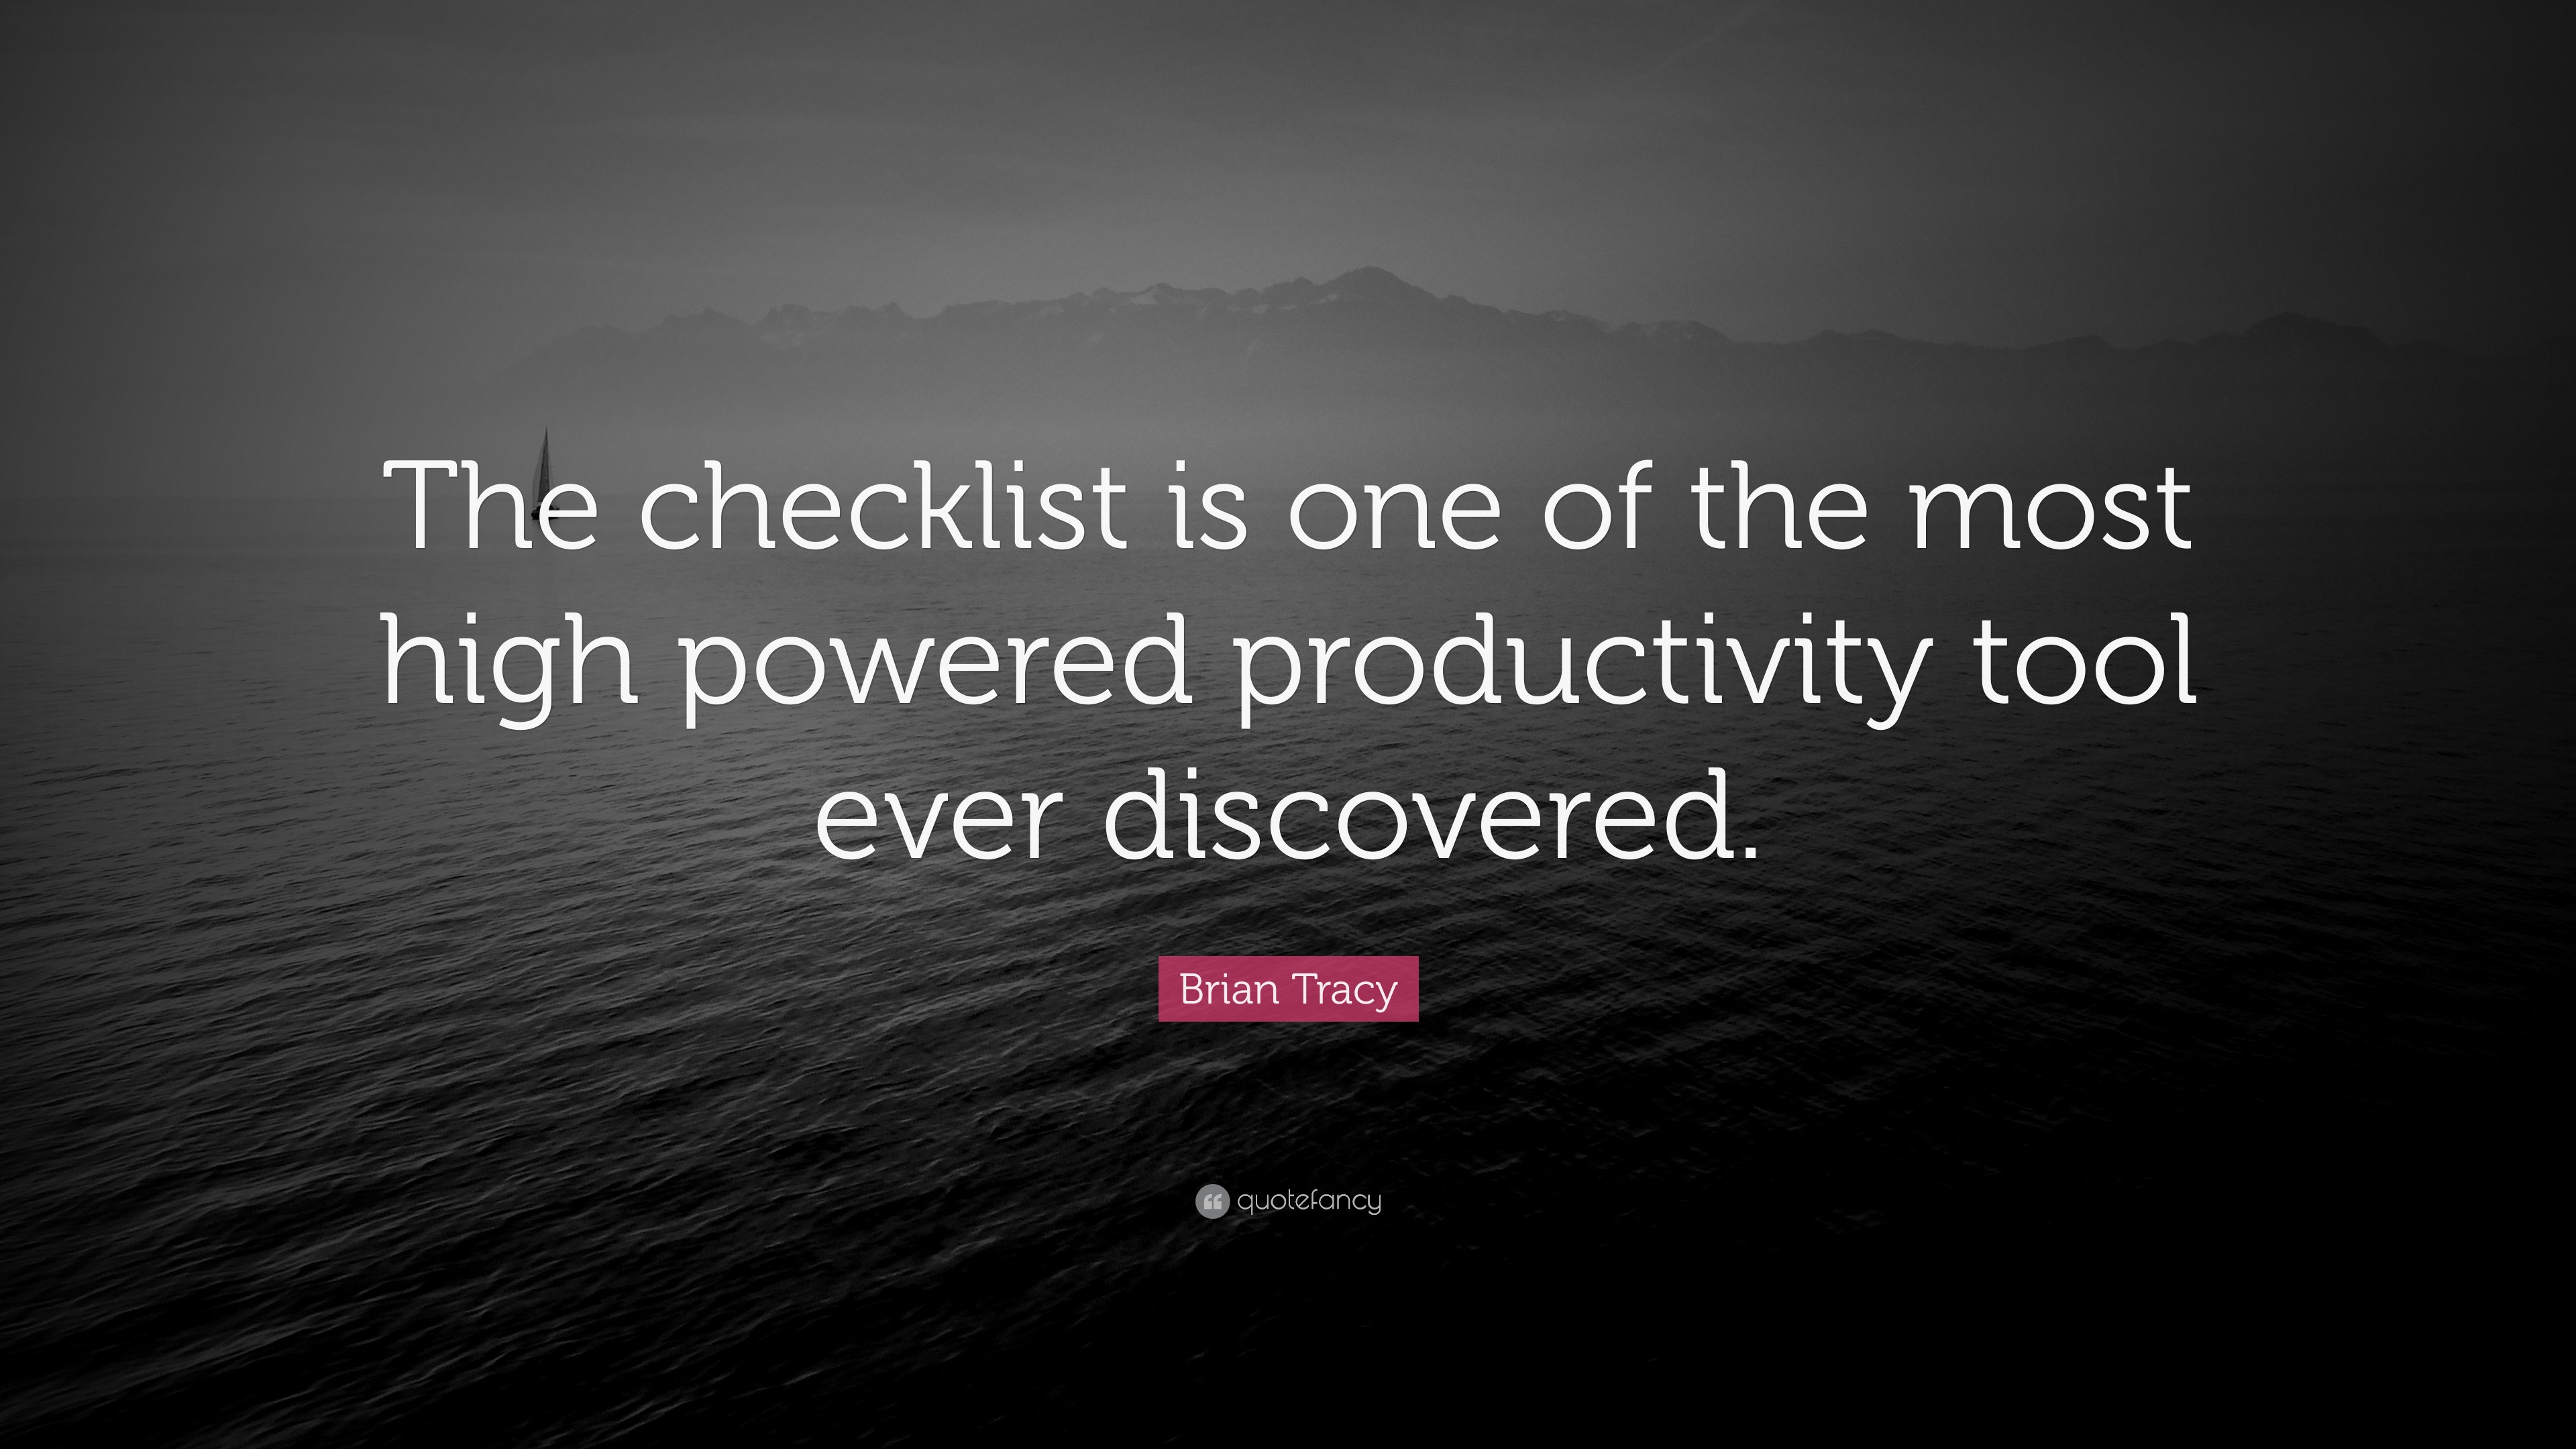 Brian Tracy Quote: “The checklist is one of the most high powered